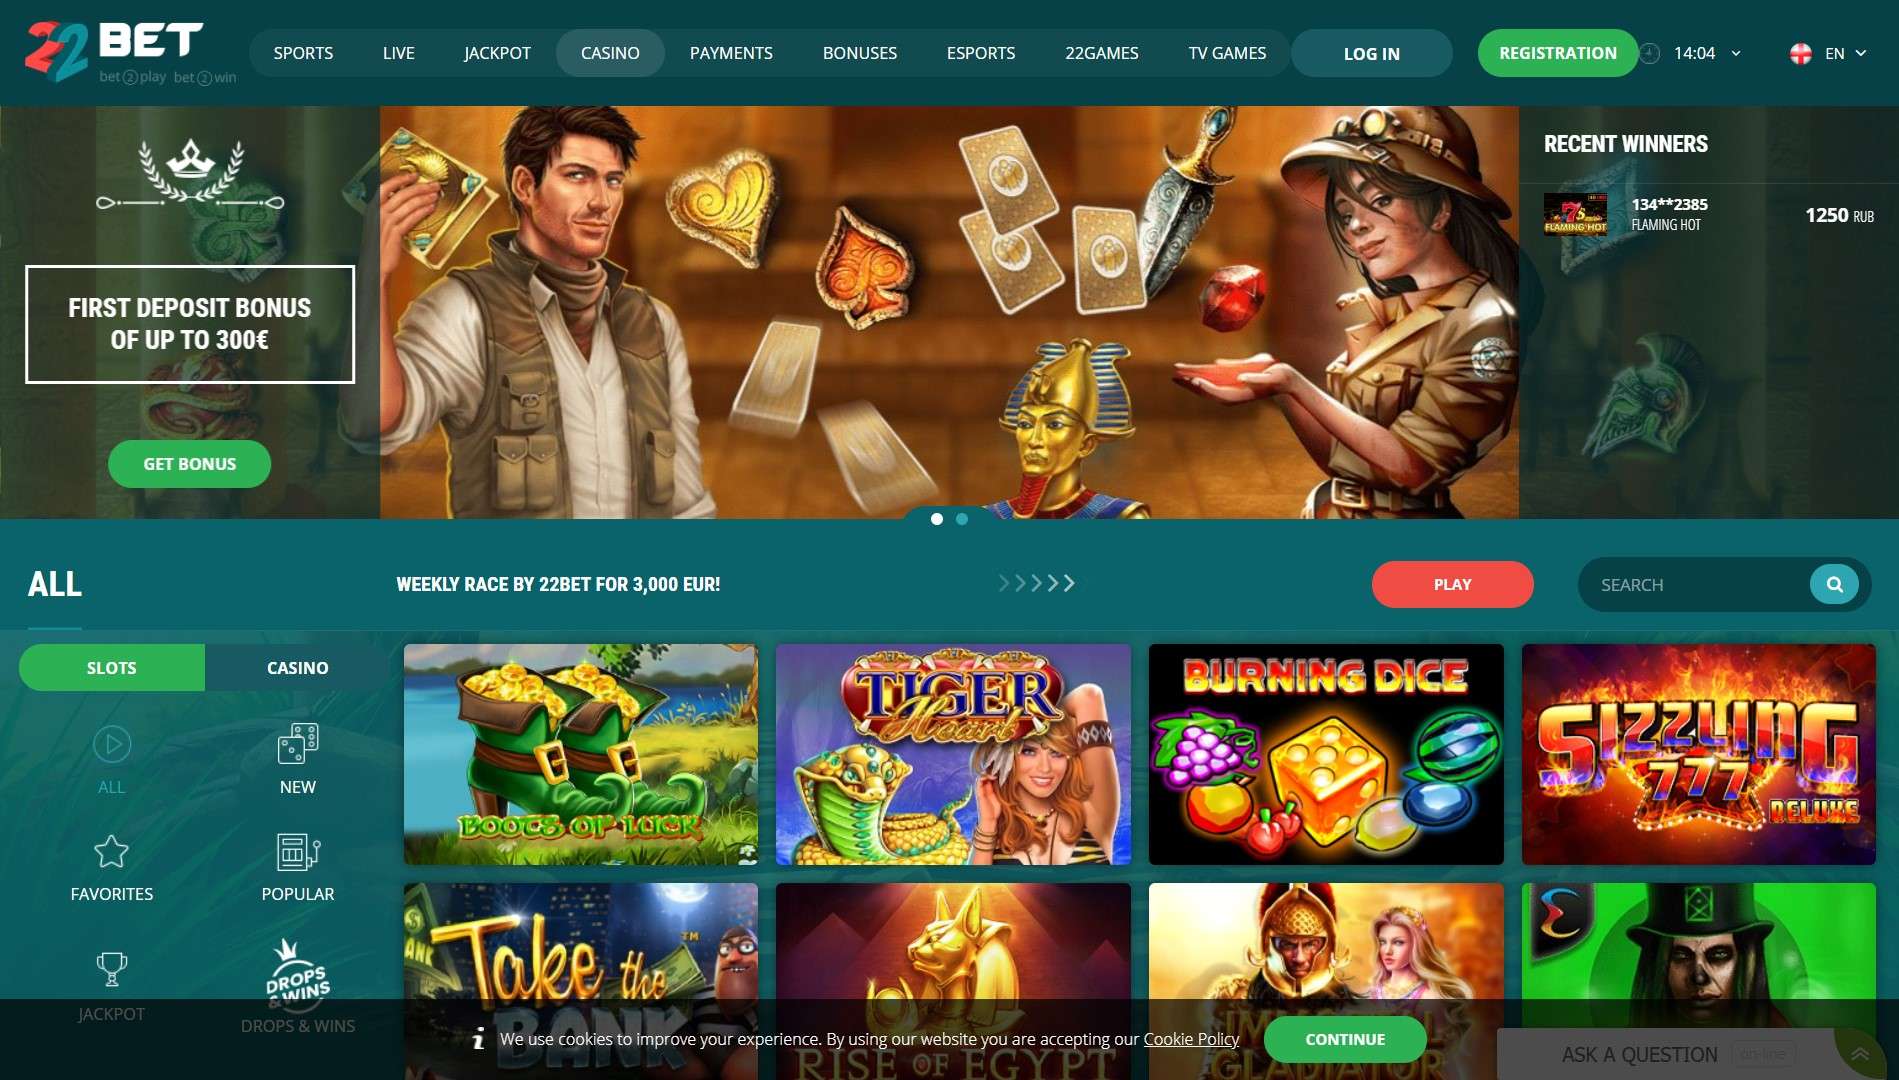 Get Better 22bet casino Results By Following 3 Simple Steps